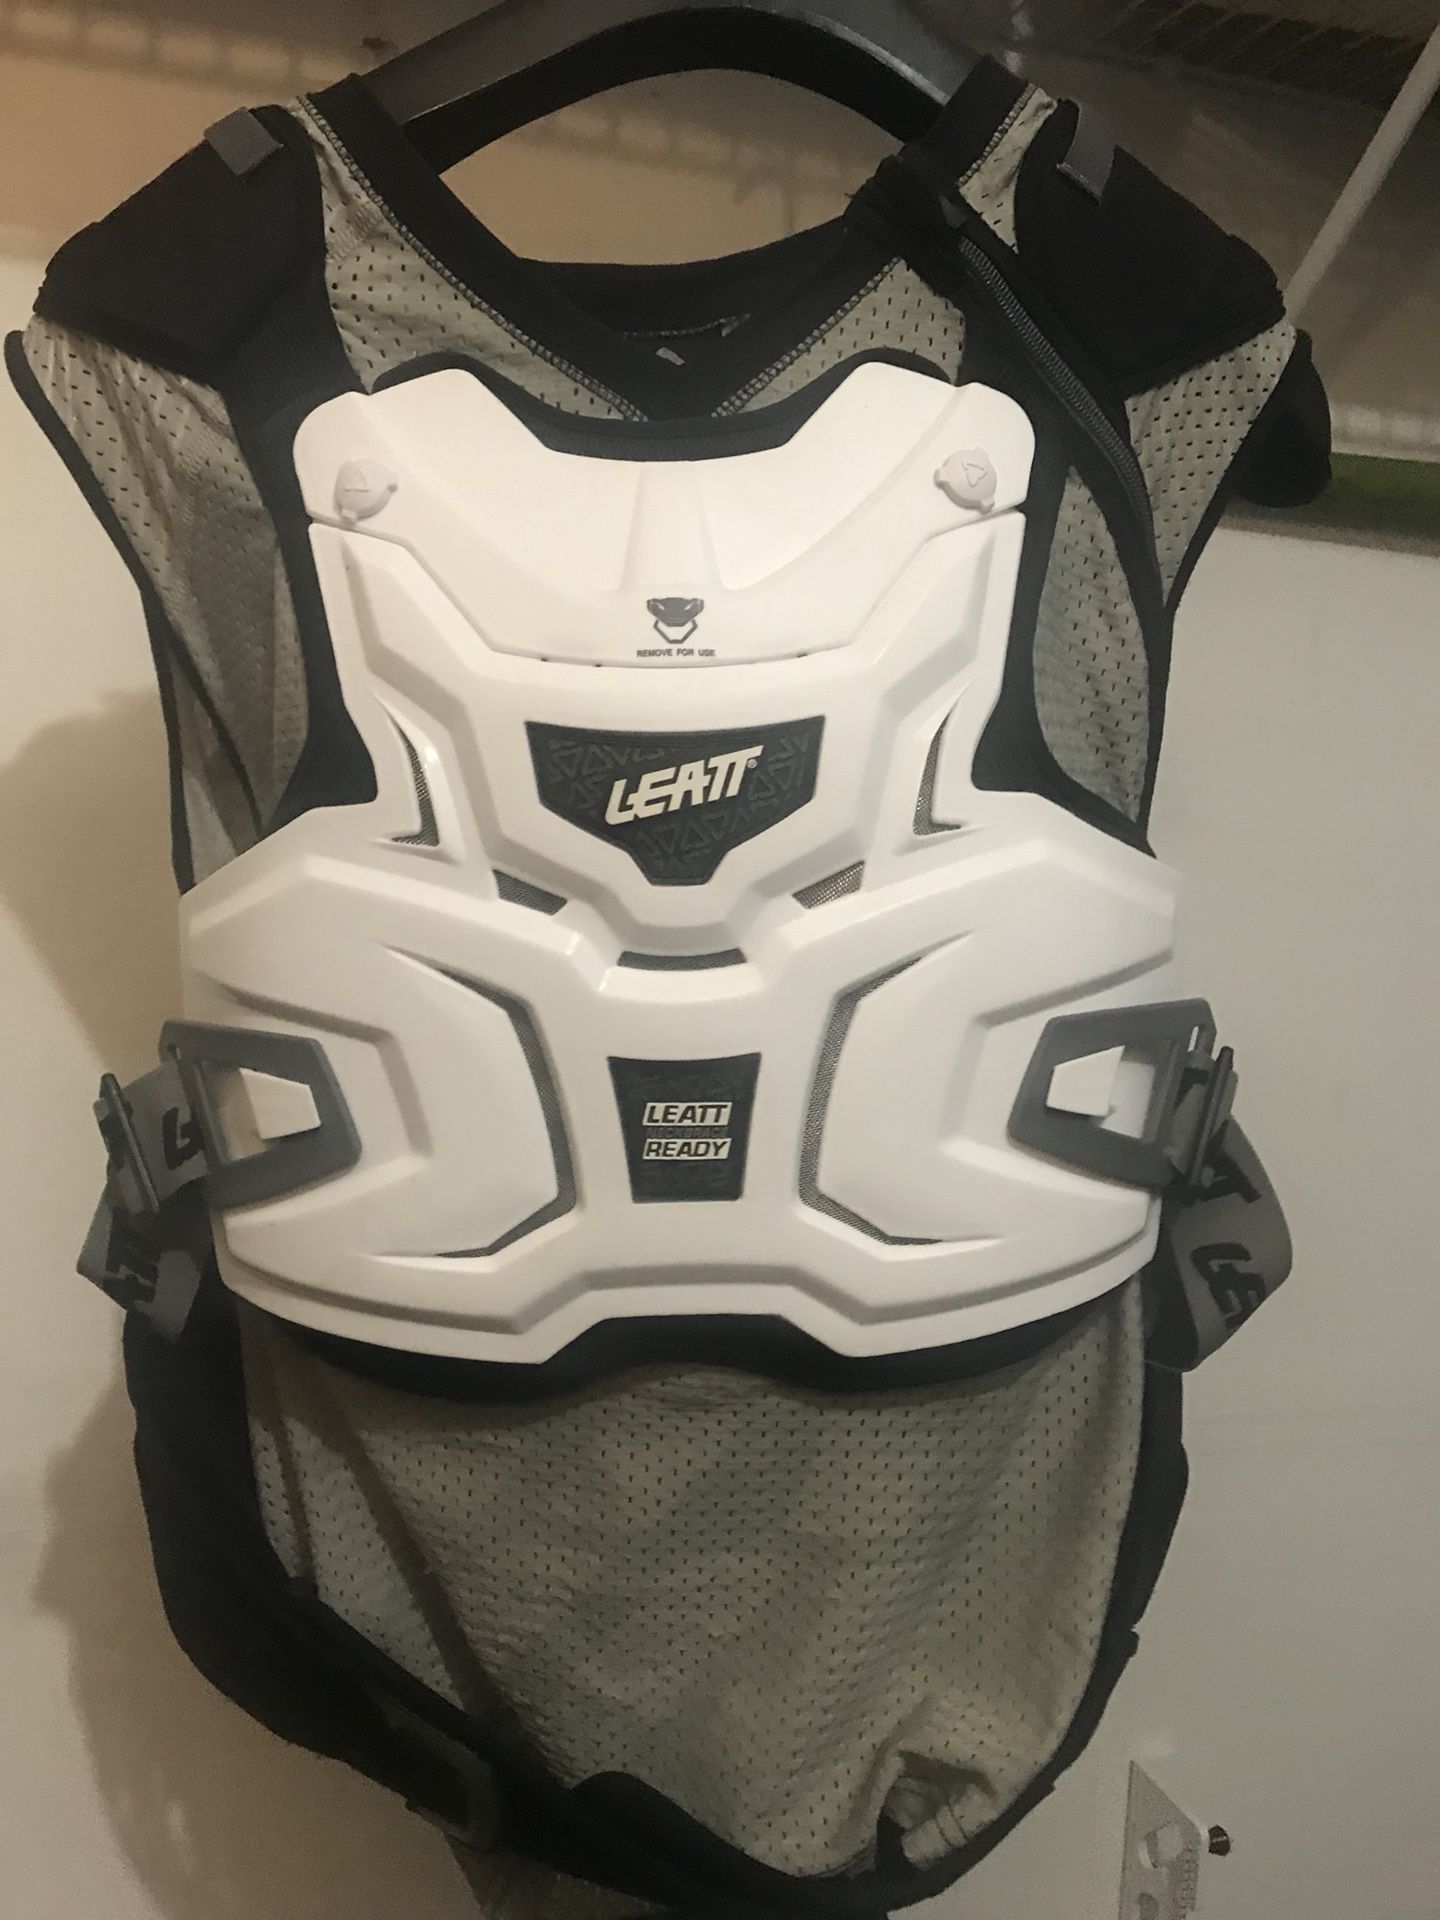 Leatt Adventure Lite Motorcycle Chest Protector Size: Small/Medium Fits Height 5’5 to 5’9